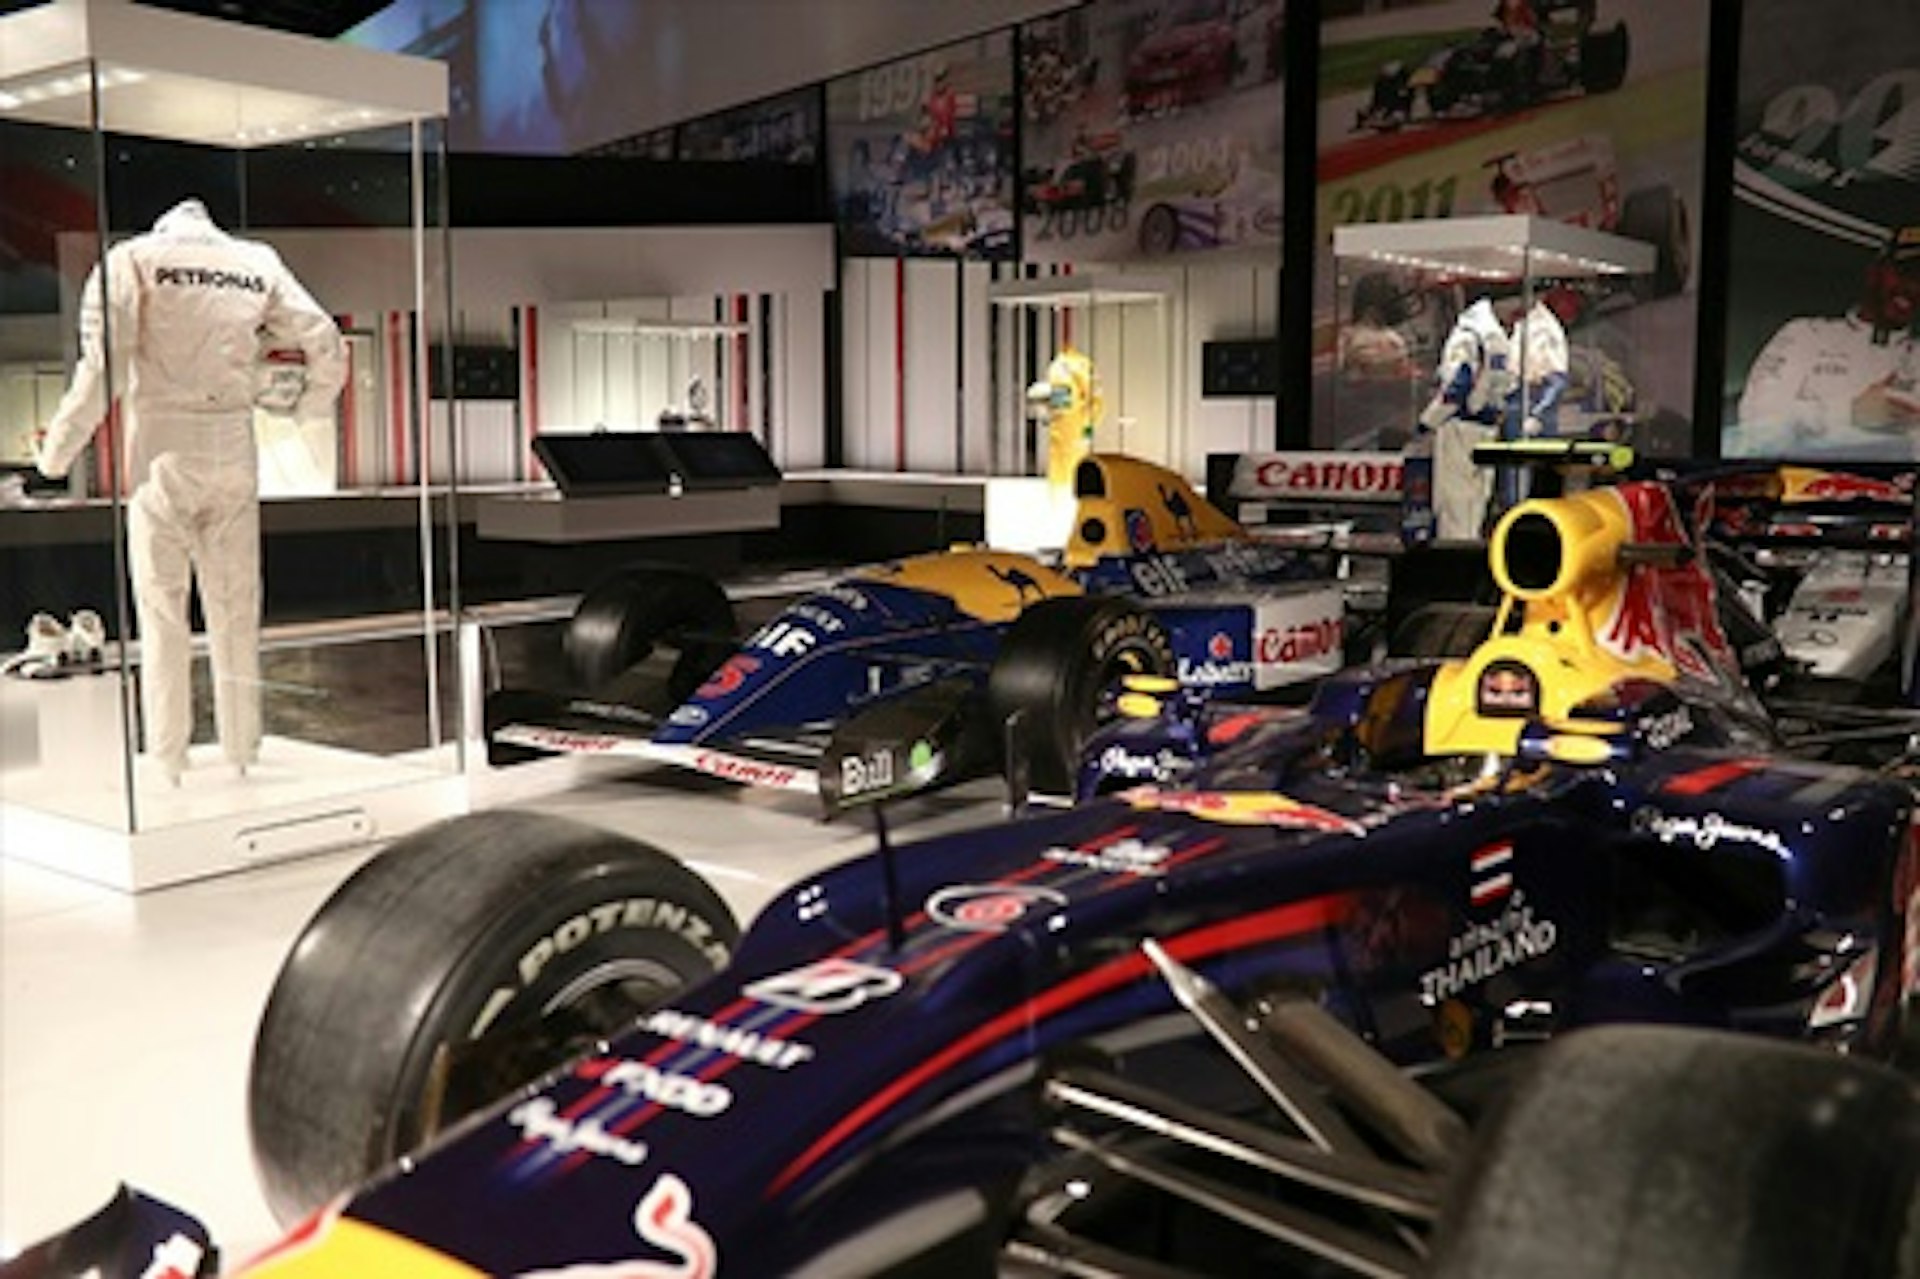 The Silverstone Experience - An Immersive History of British Motor Racing for Two